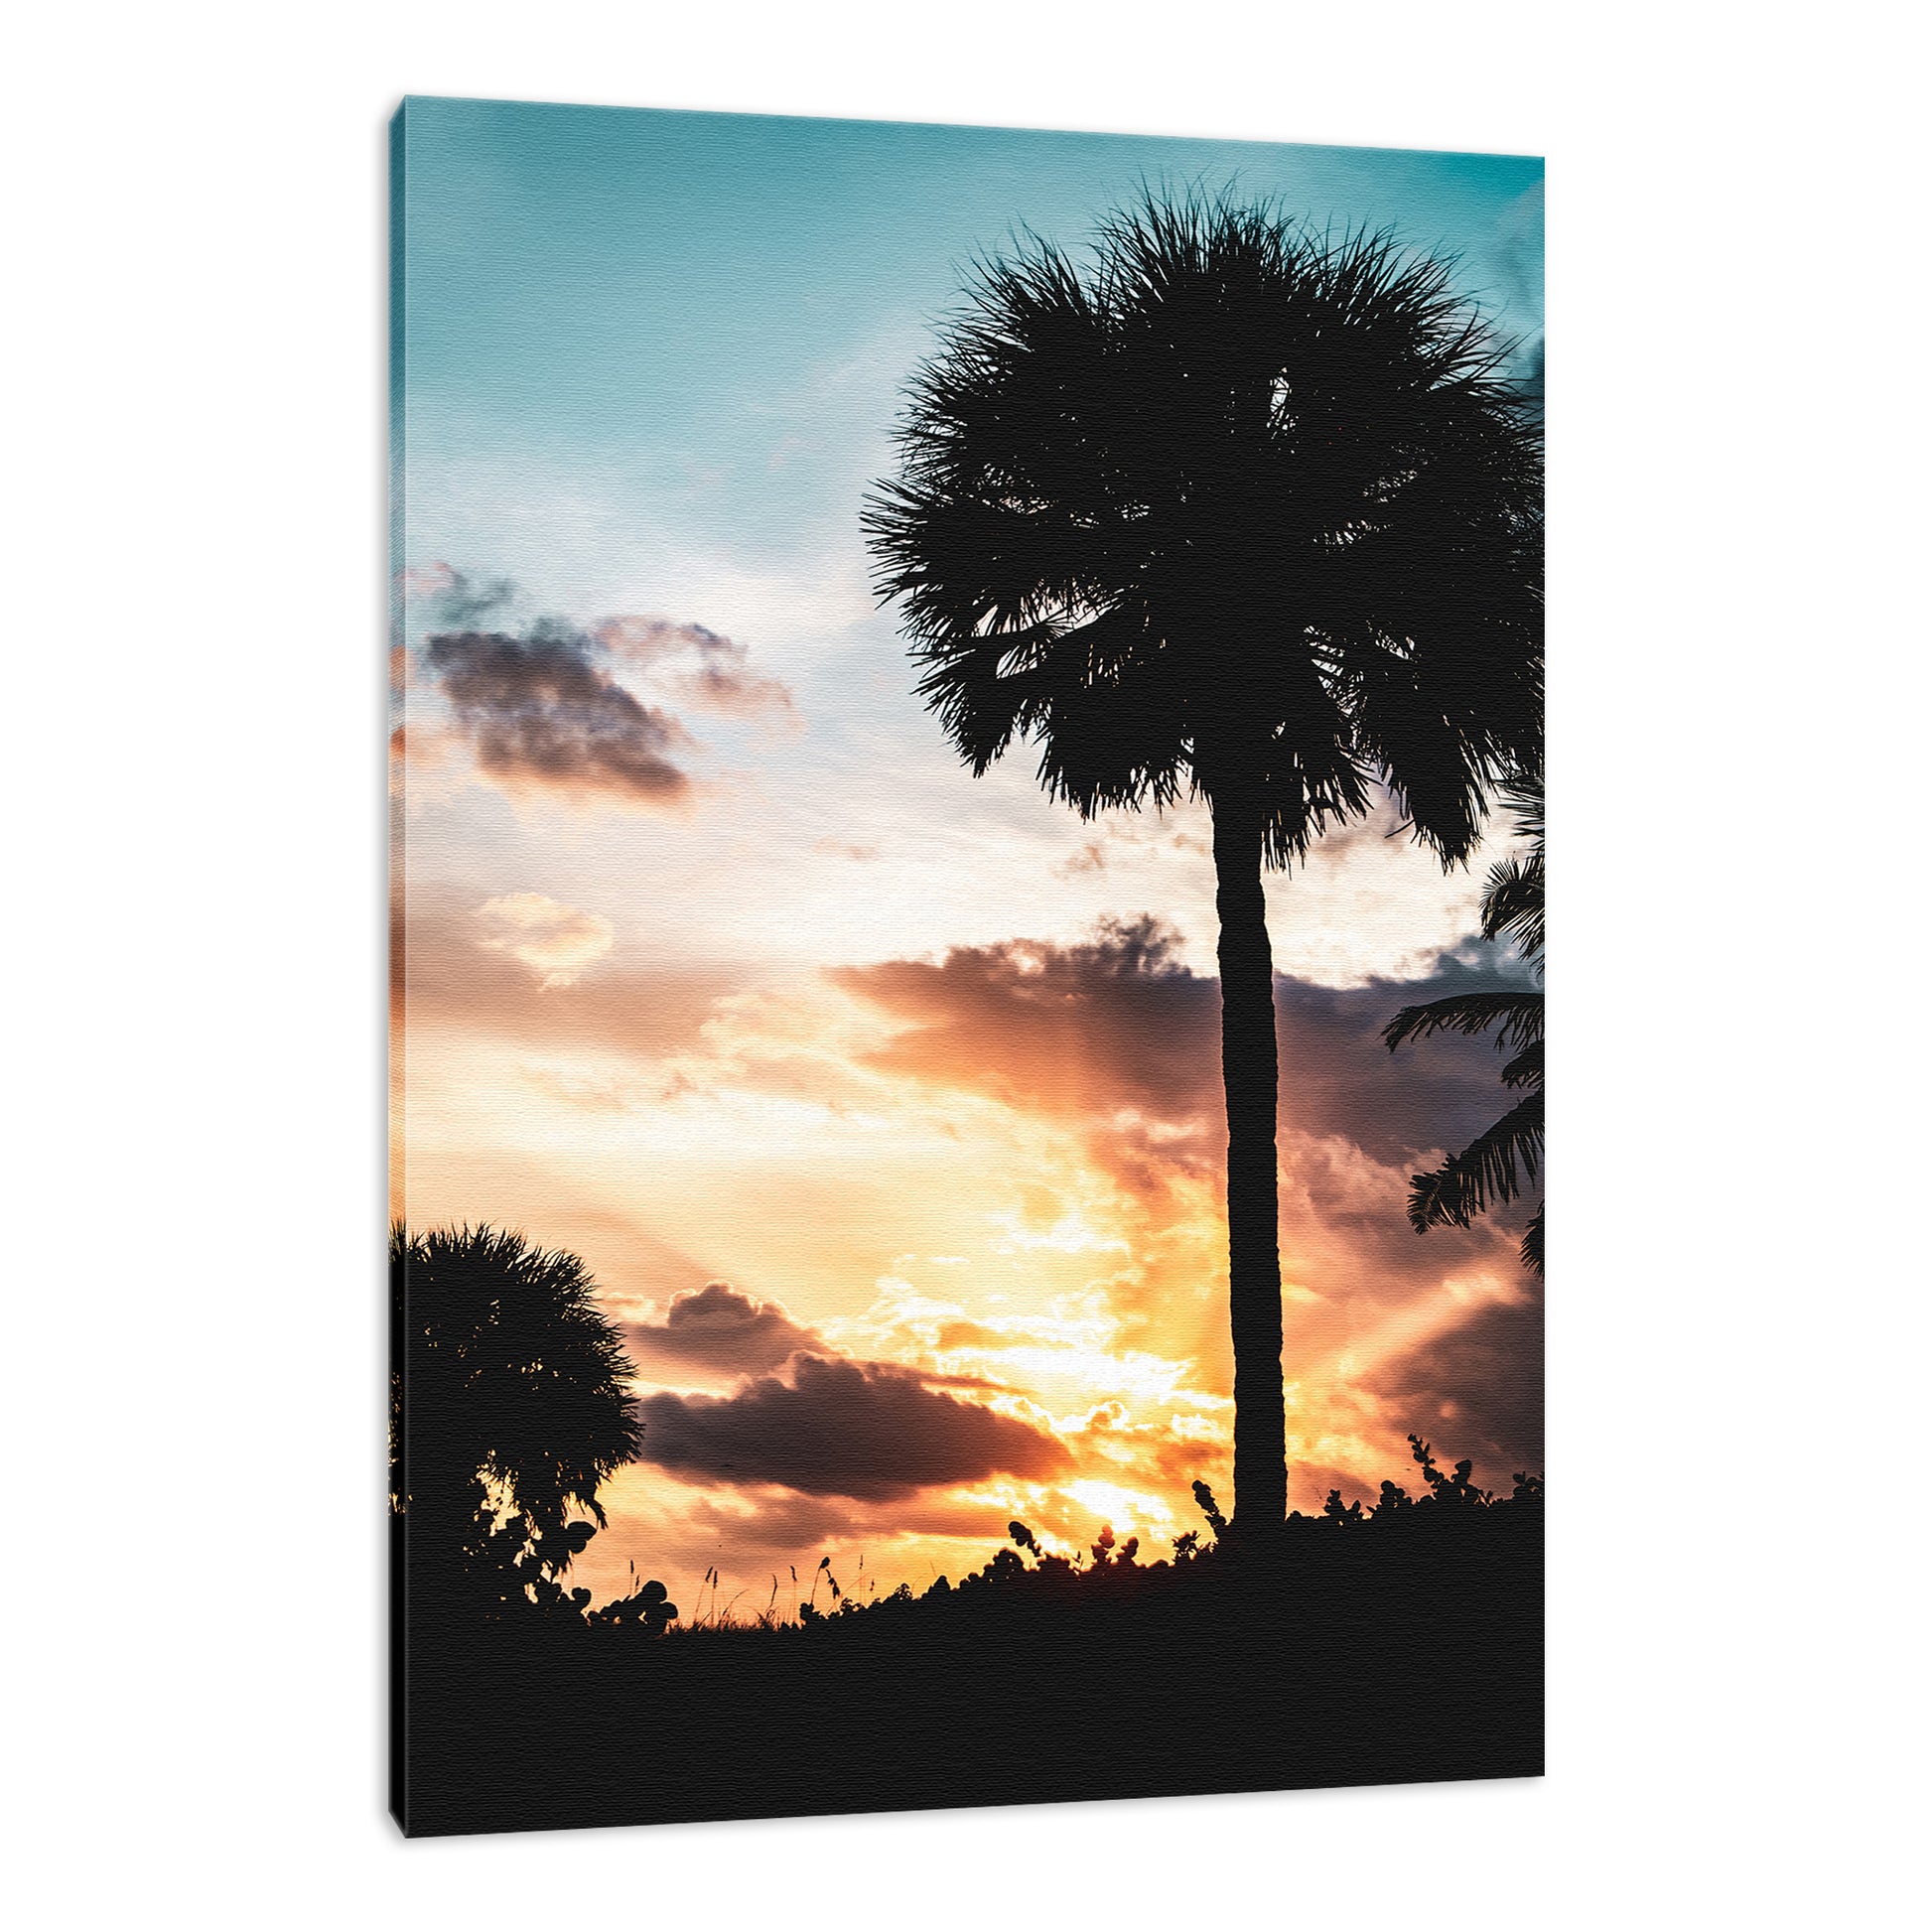 Palm Tree Silhouettes and Sunset Coastal Landscape Fine Art Canvas Wall Art Prints  - PIPAFINEART